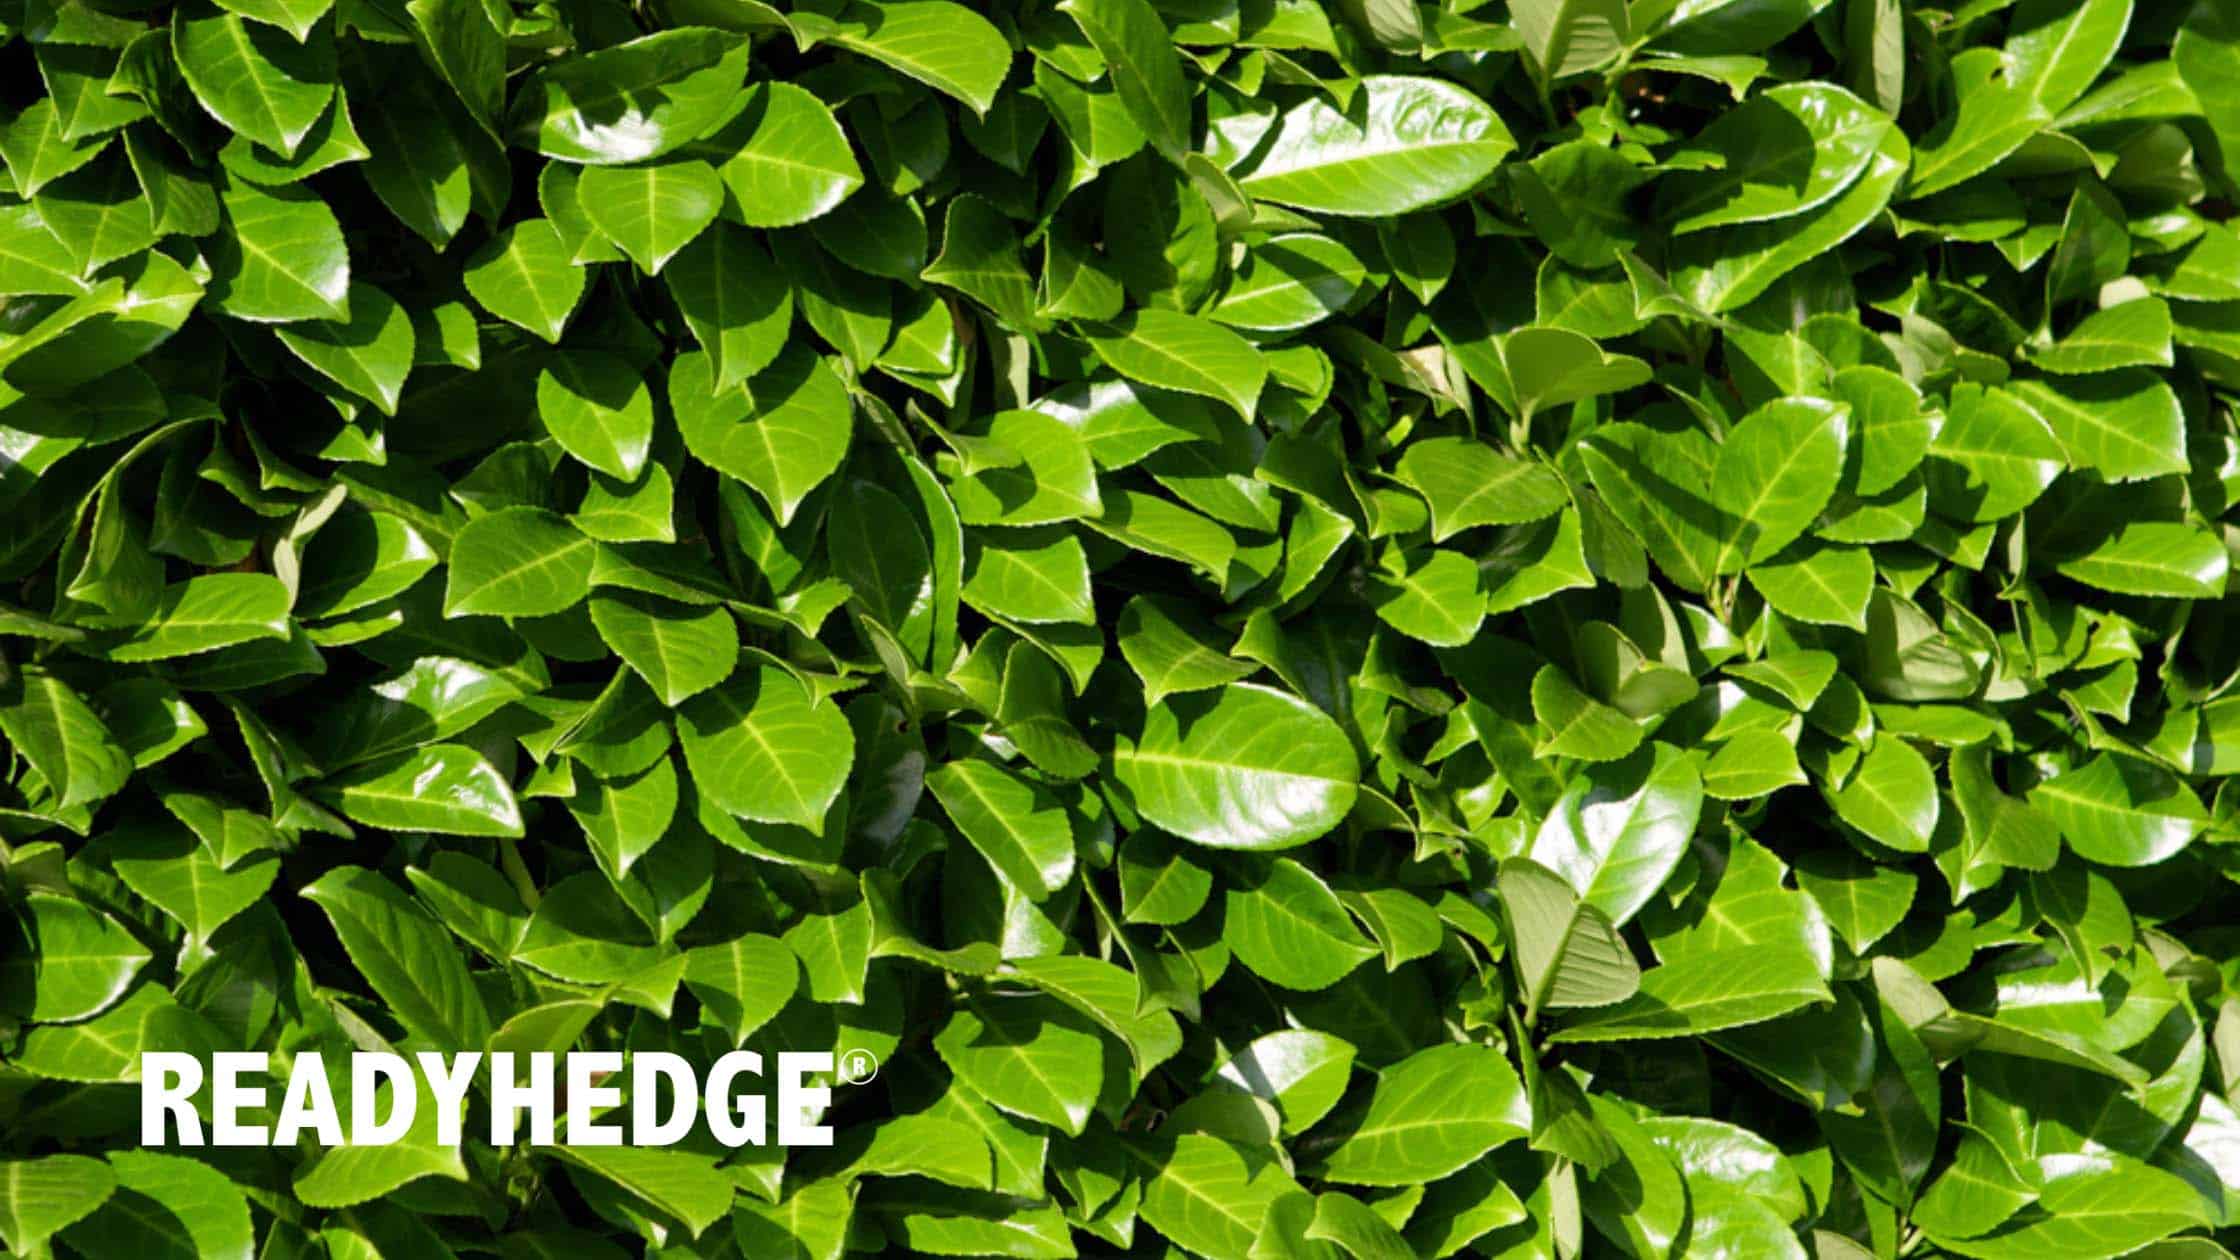 Top 15 Fast Growing Evergreen Hedging Plants in the UK - Readyhe